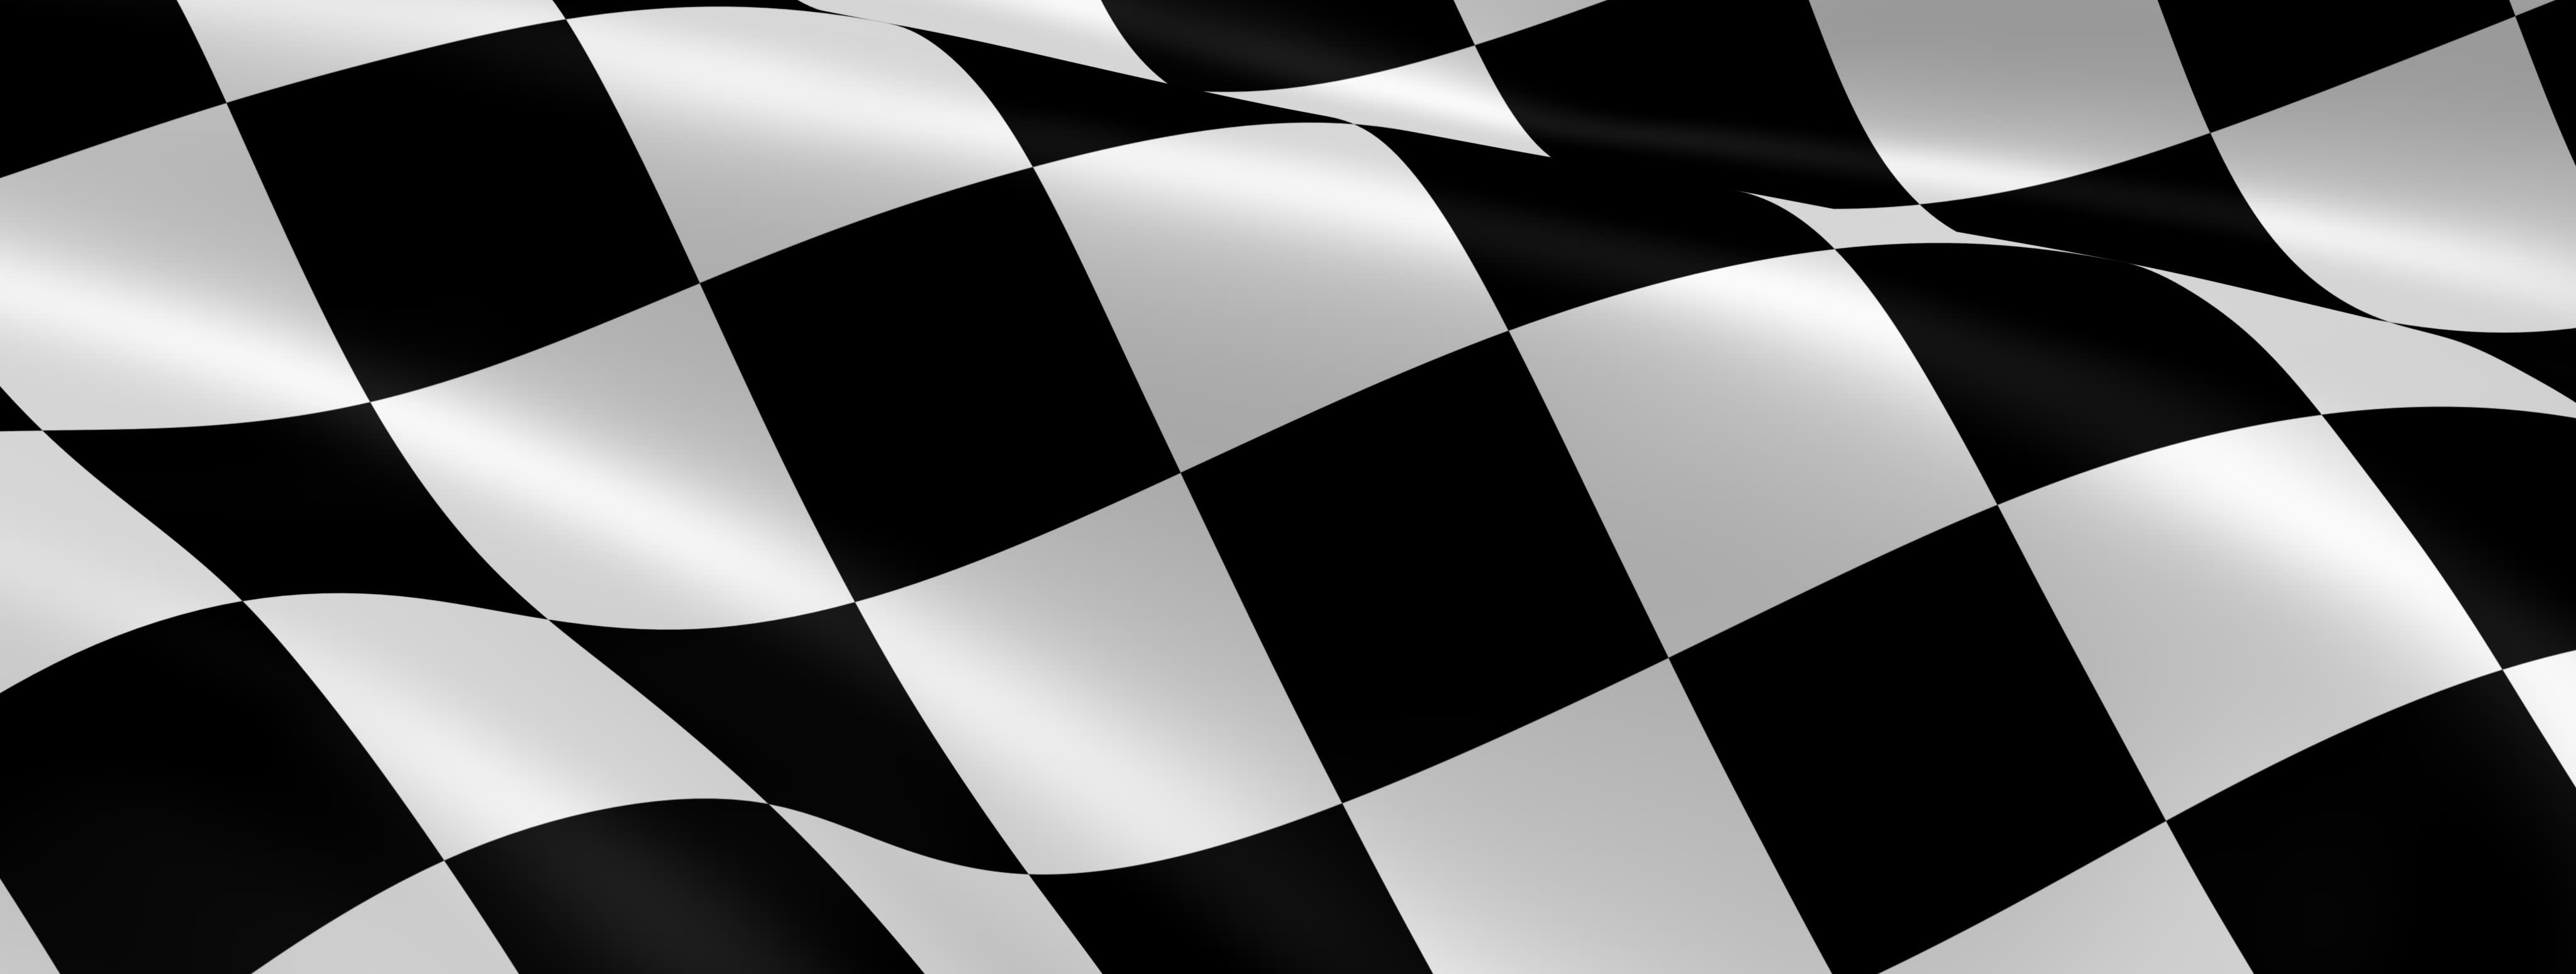 Racing Backgrounds For Powerpoint - HD Photos Gallery